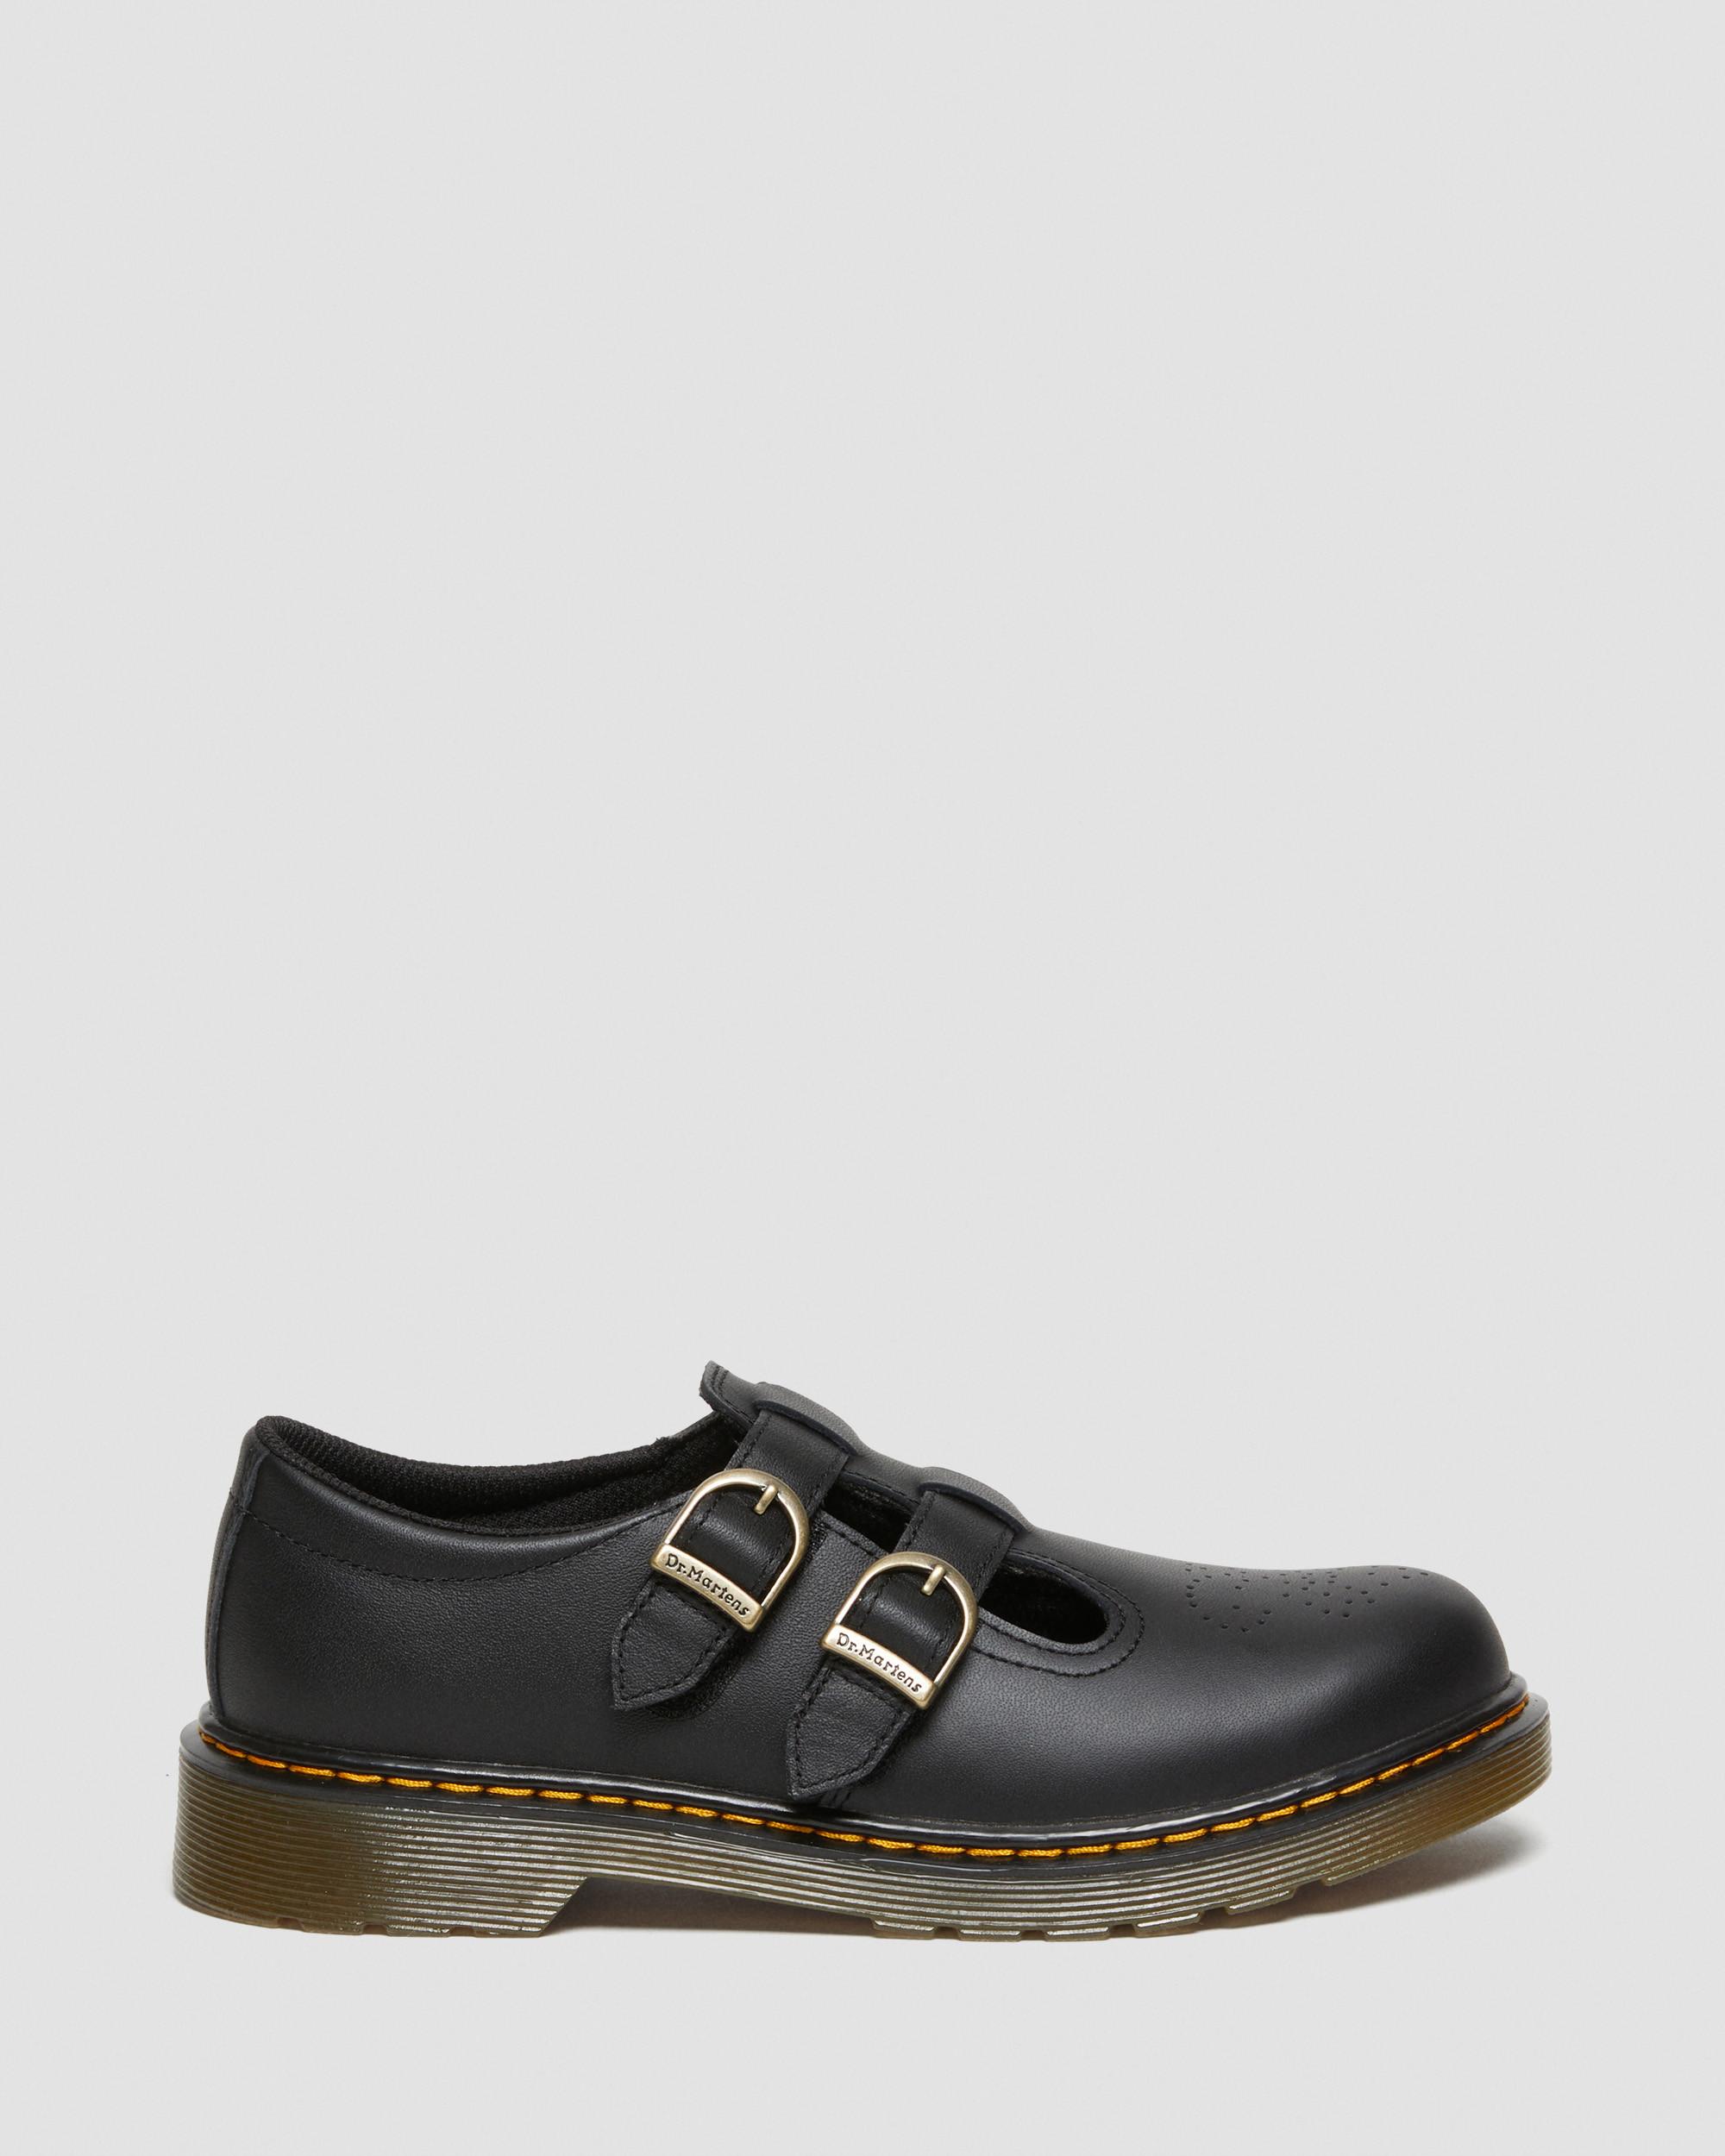 Youth 8065 Softy T Leather Mary Jane Shoes in Black | Dr. Martens